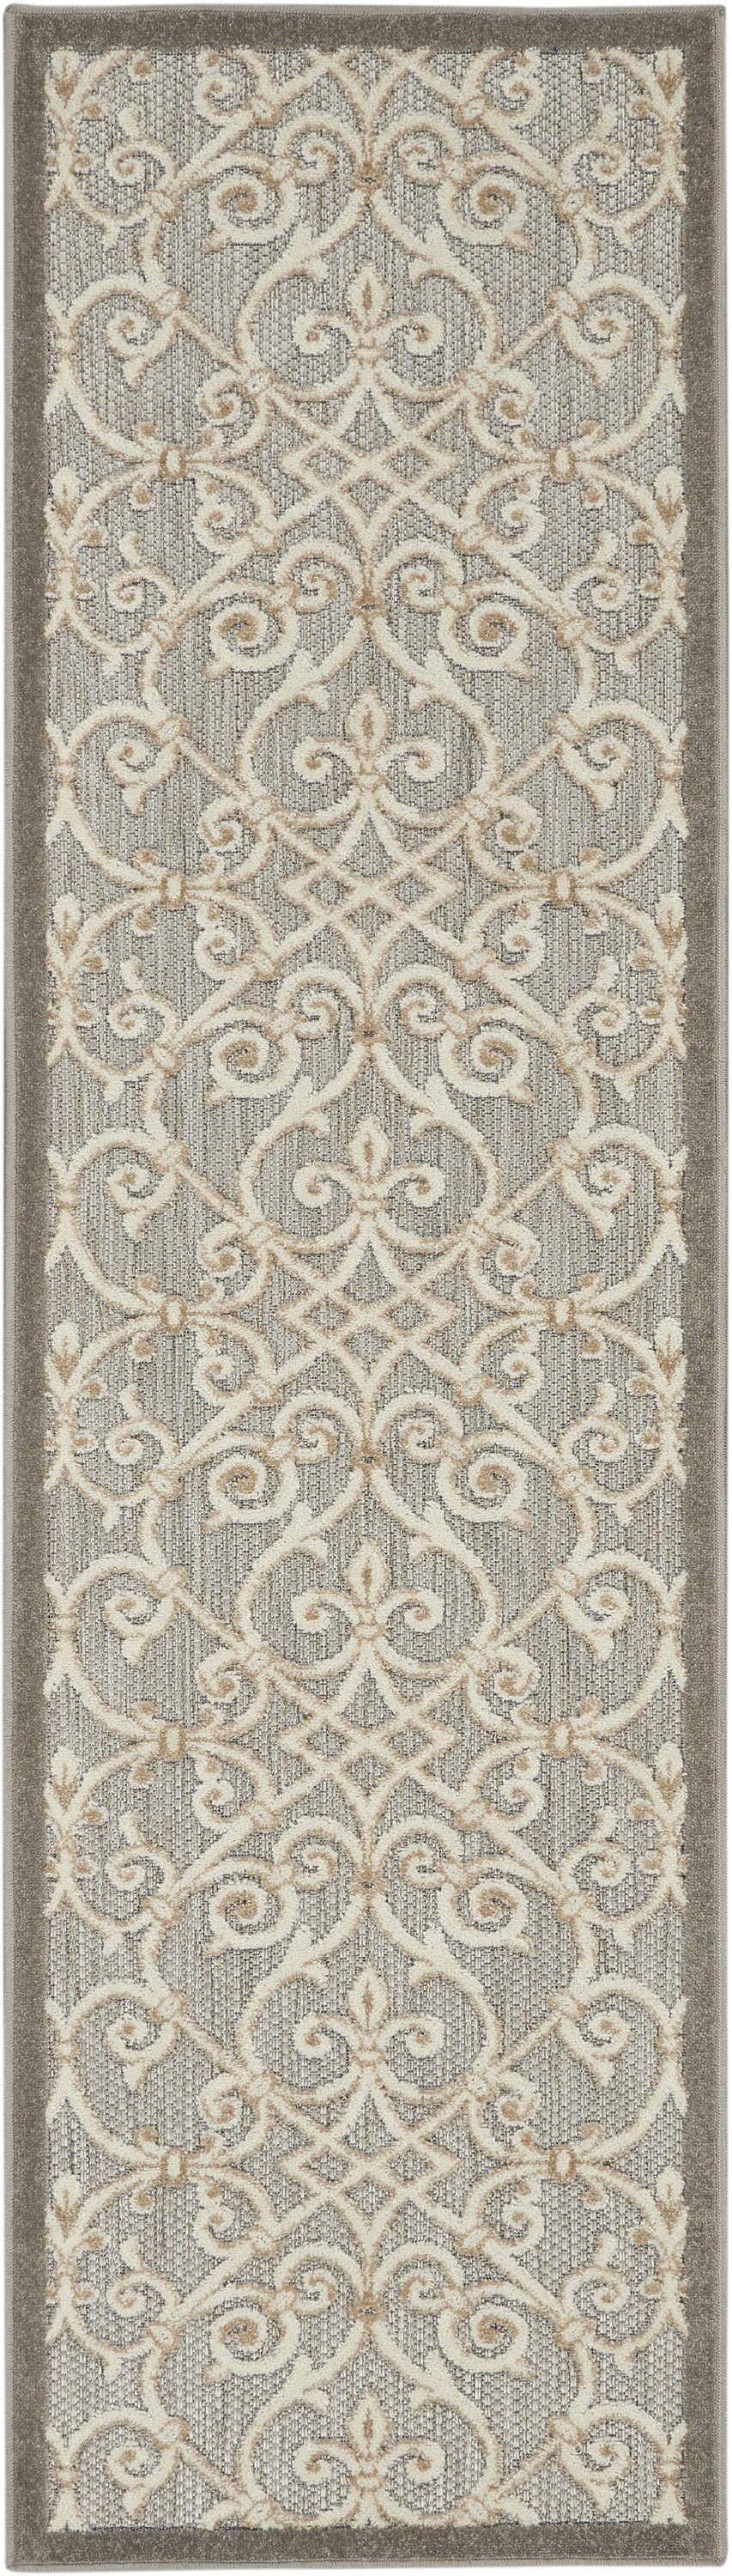 2' X 8' Gray And Ivory Floral Indoor Outdoor Area Rug-385043-1